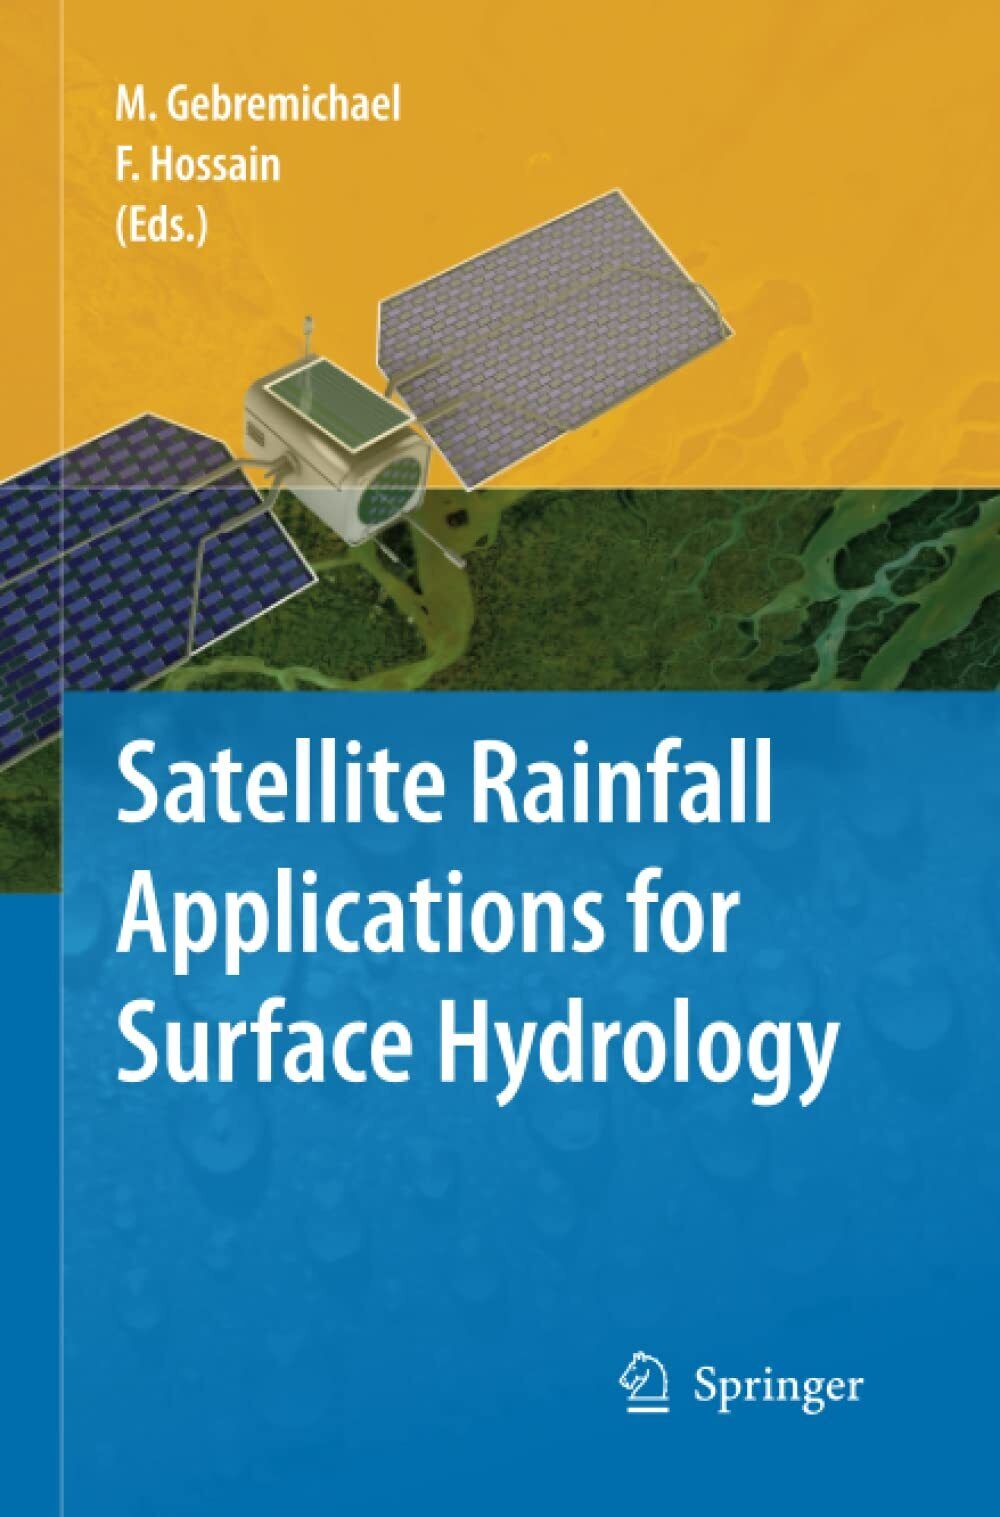 Satellite Rainfall Applications for Surface Hydrology - Gebremichael - 2014